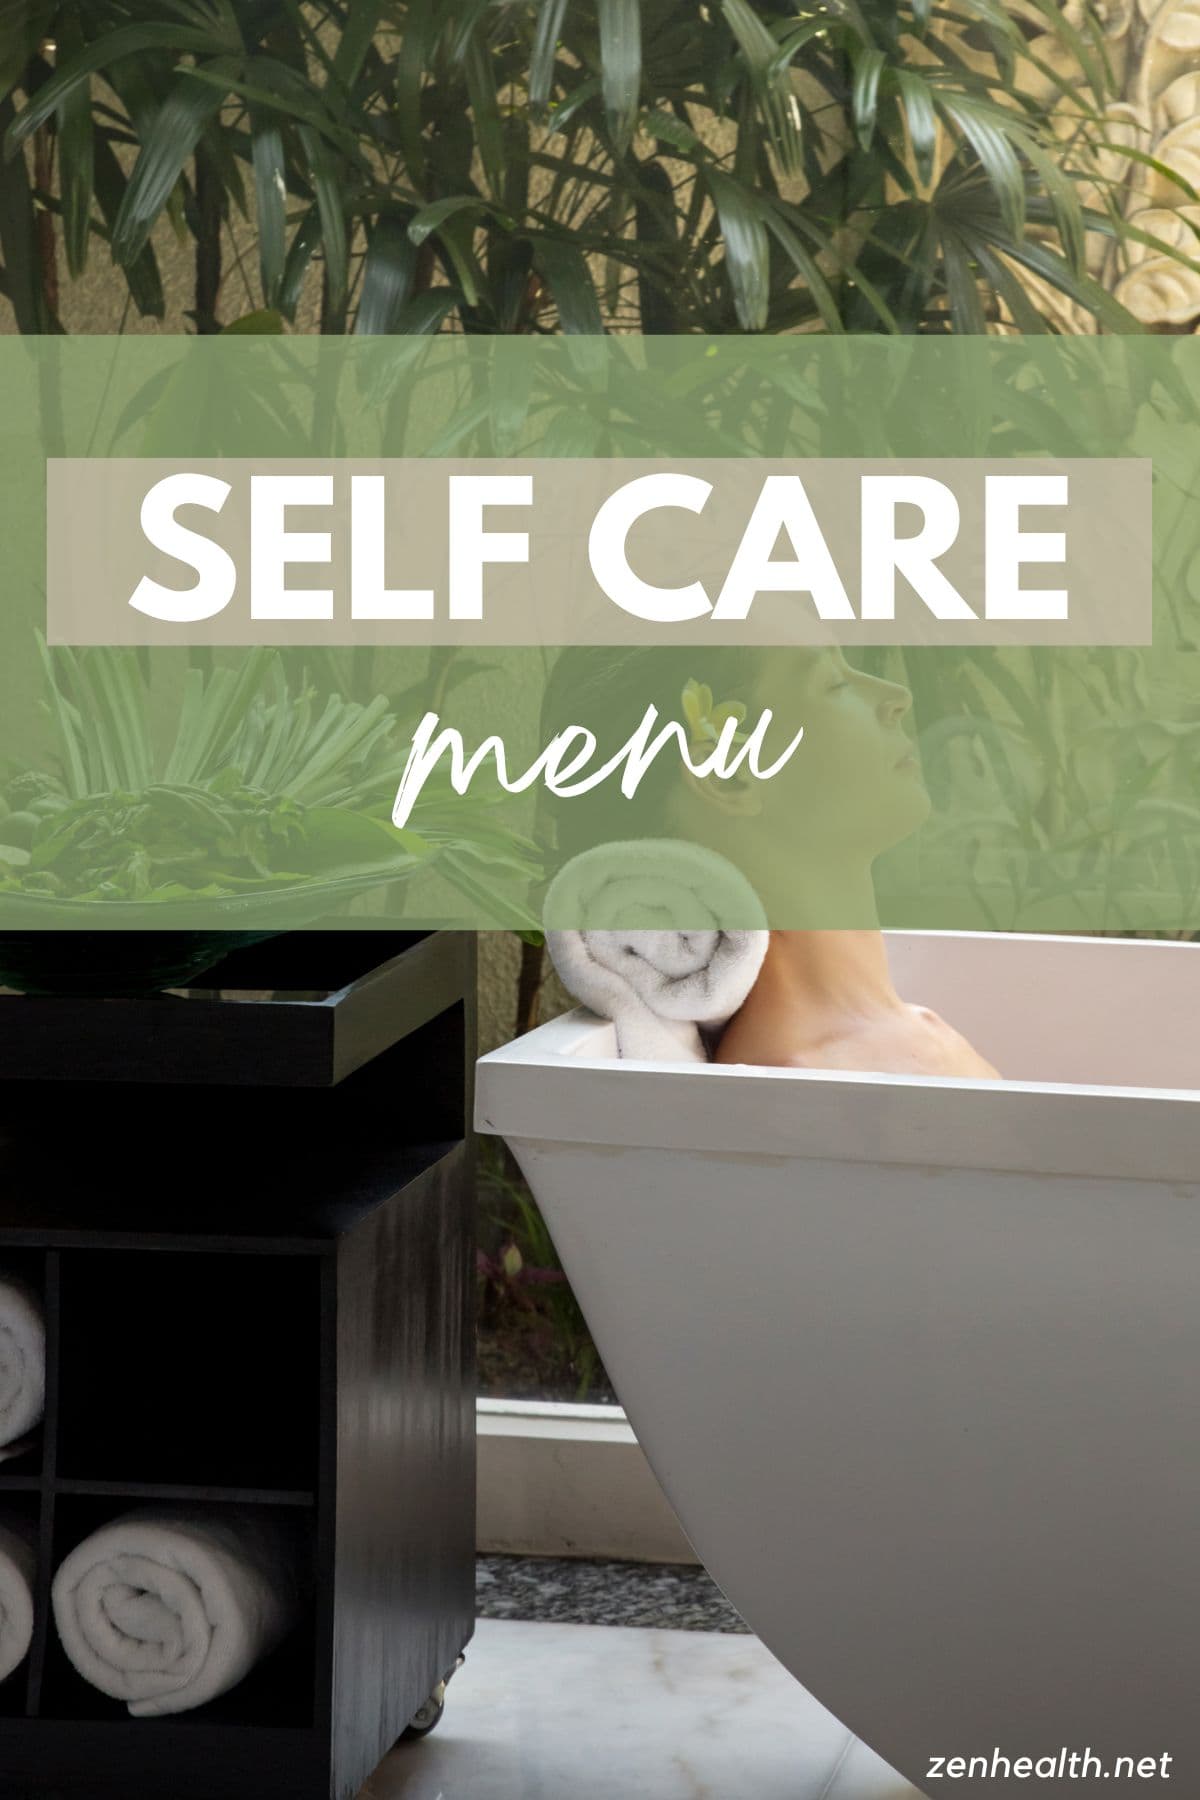 self care menu text overlay on a woman lying in a white tub with a white towel rolled under her neck with green plants and dark cupboard with more rolled white towels in the background